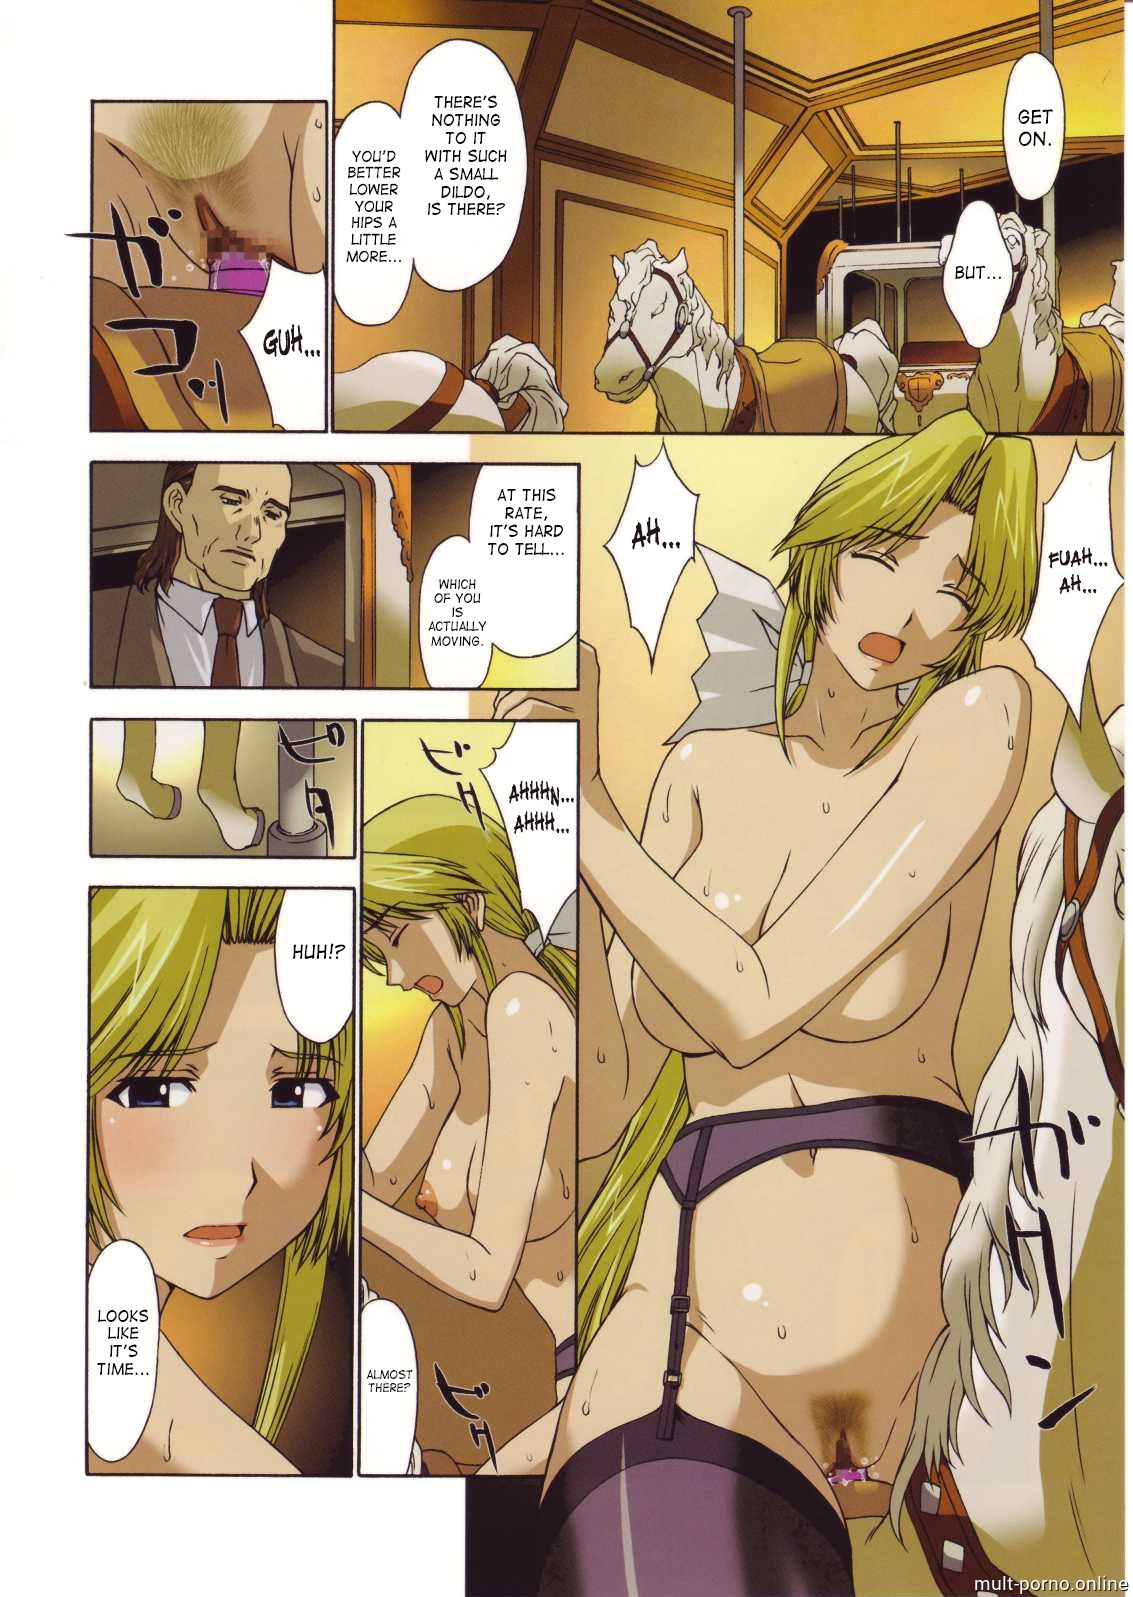 Busty Helena from Dead or Alive was forced to orgasm (+porn comics)